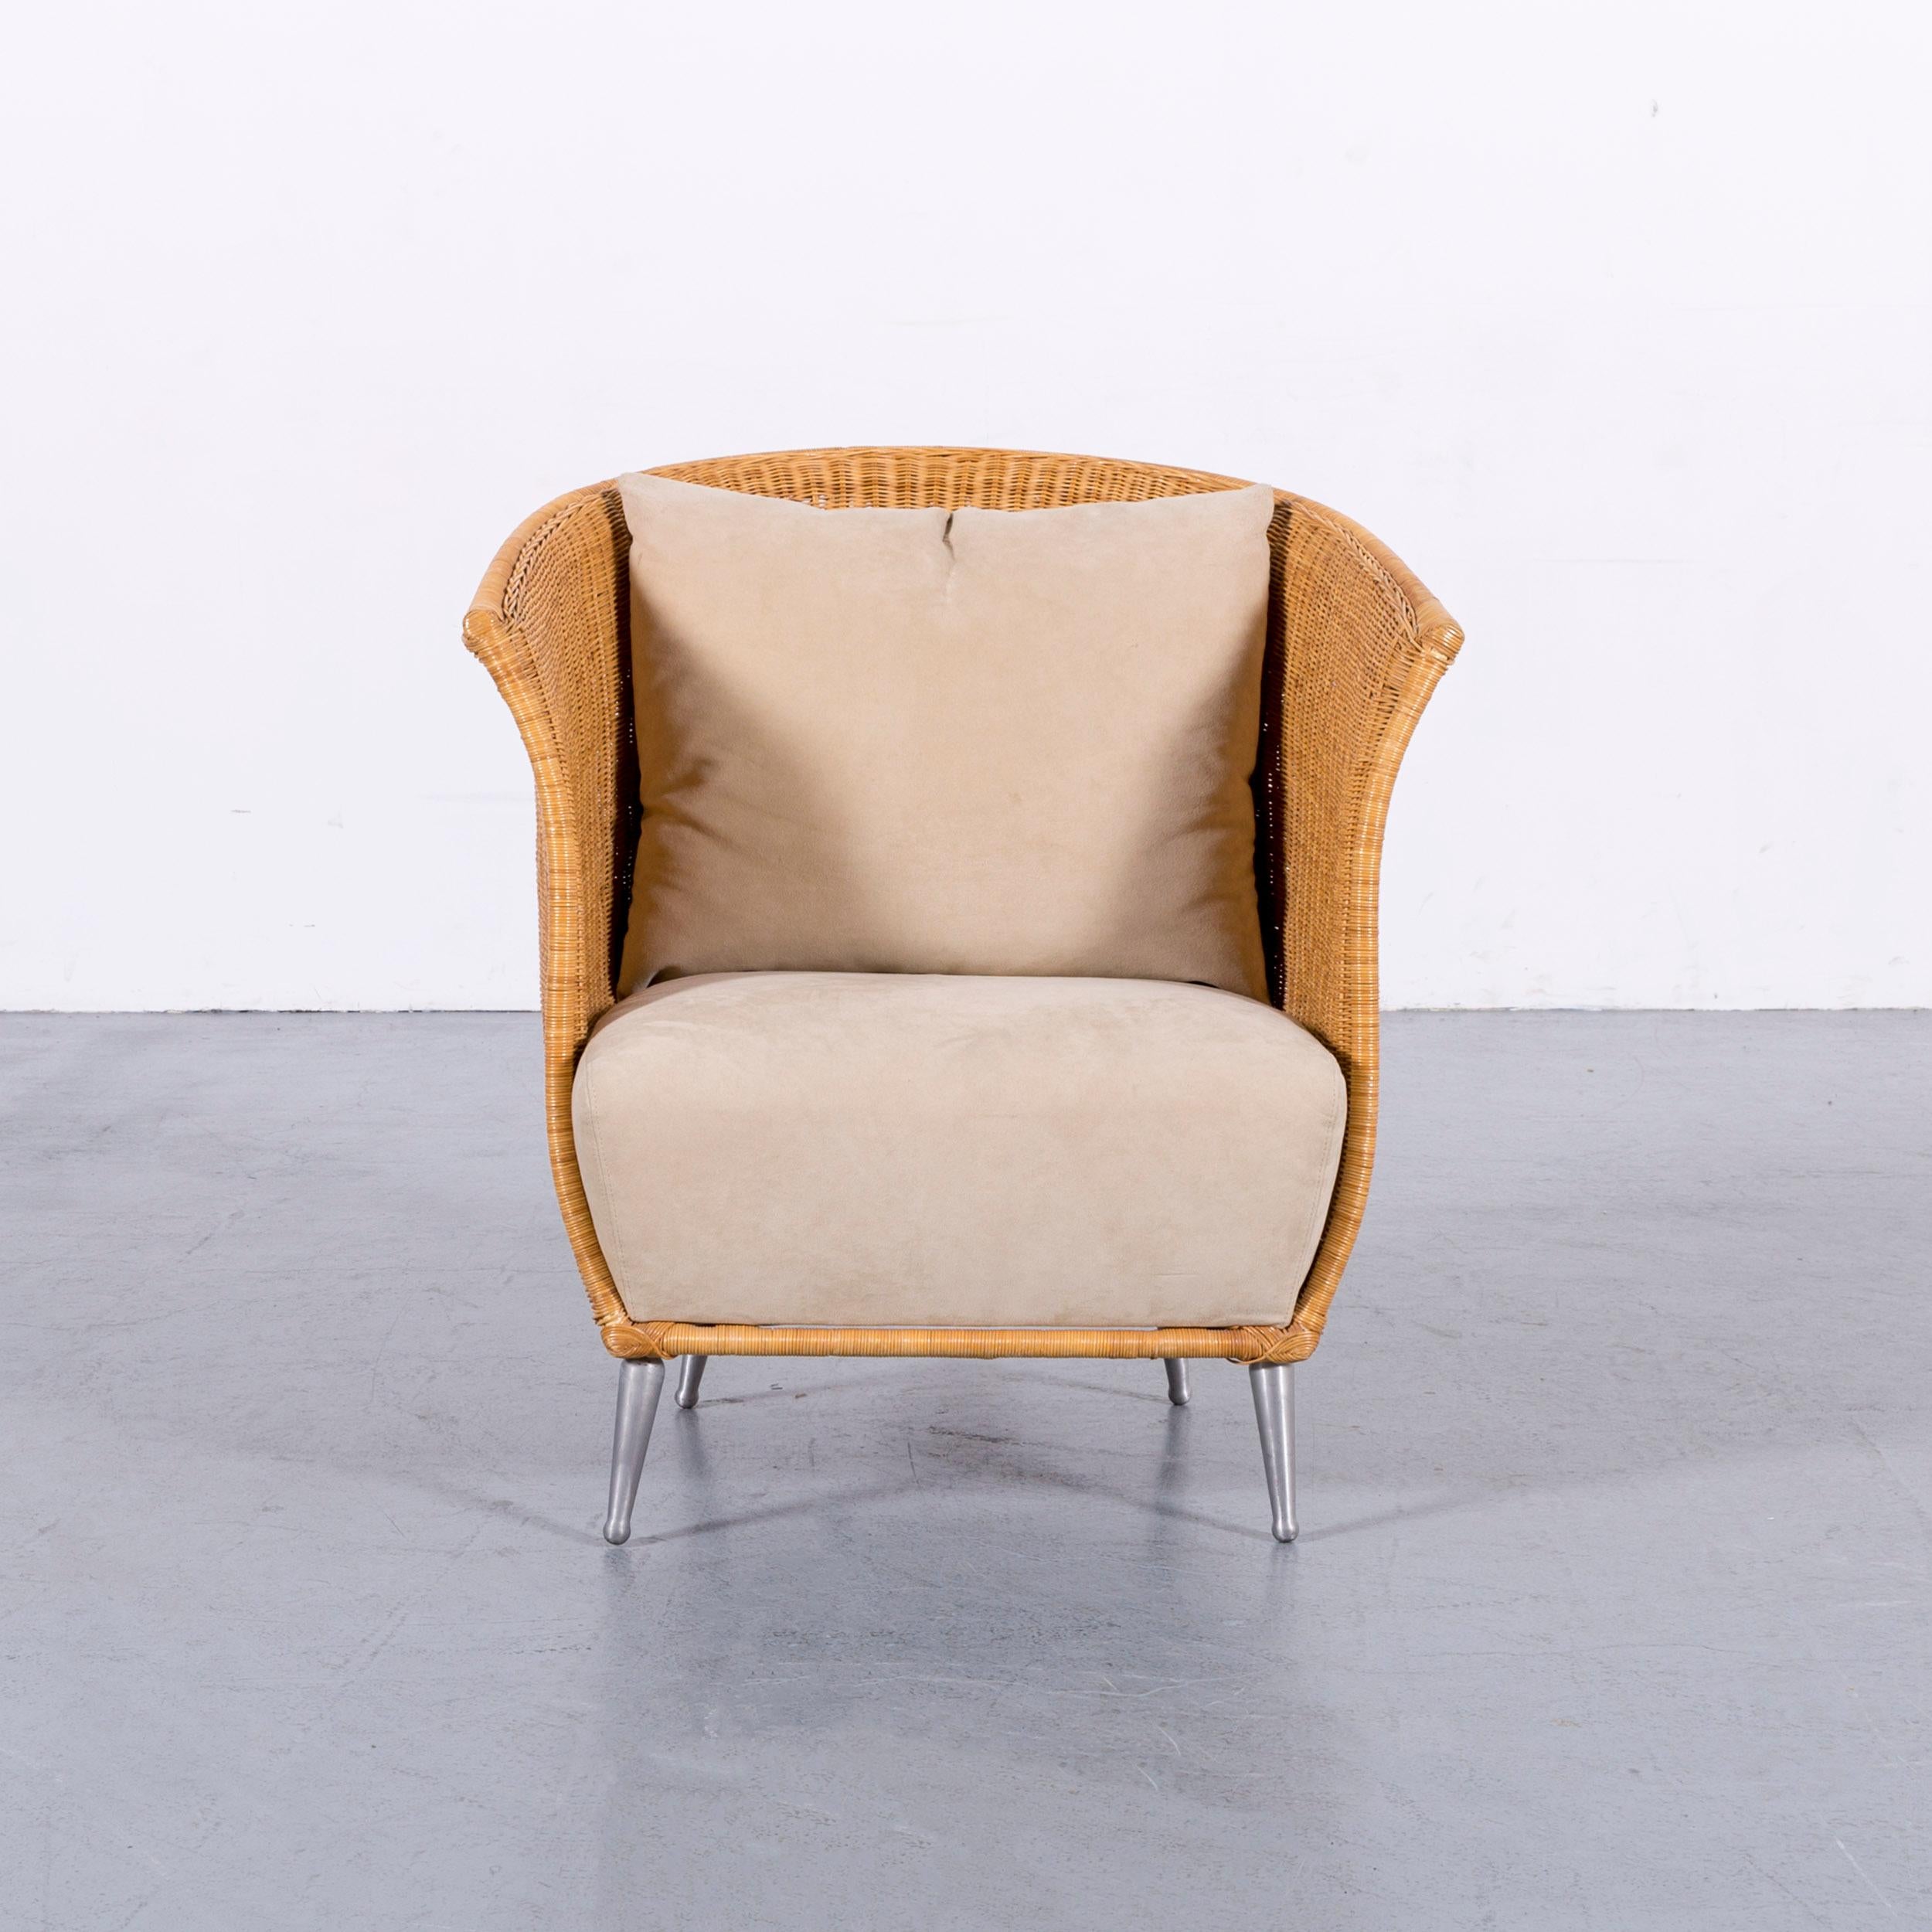 We bring to you an Ligne Roset rattan chair one-seat brown fabric.